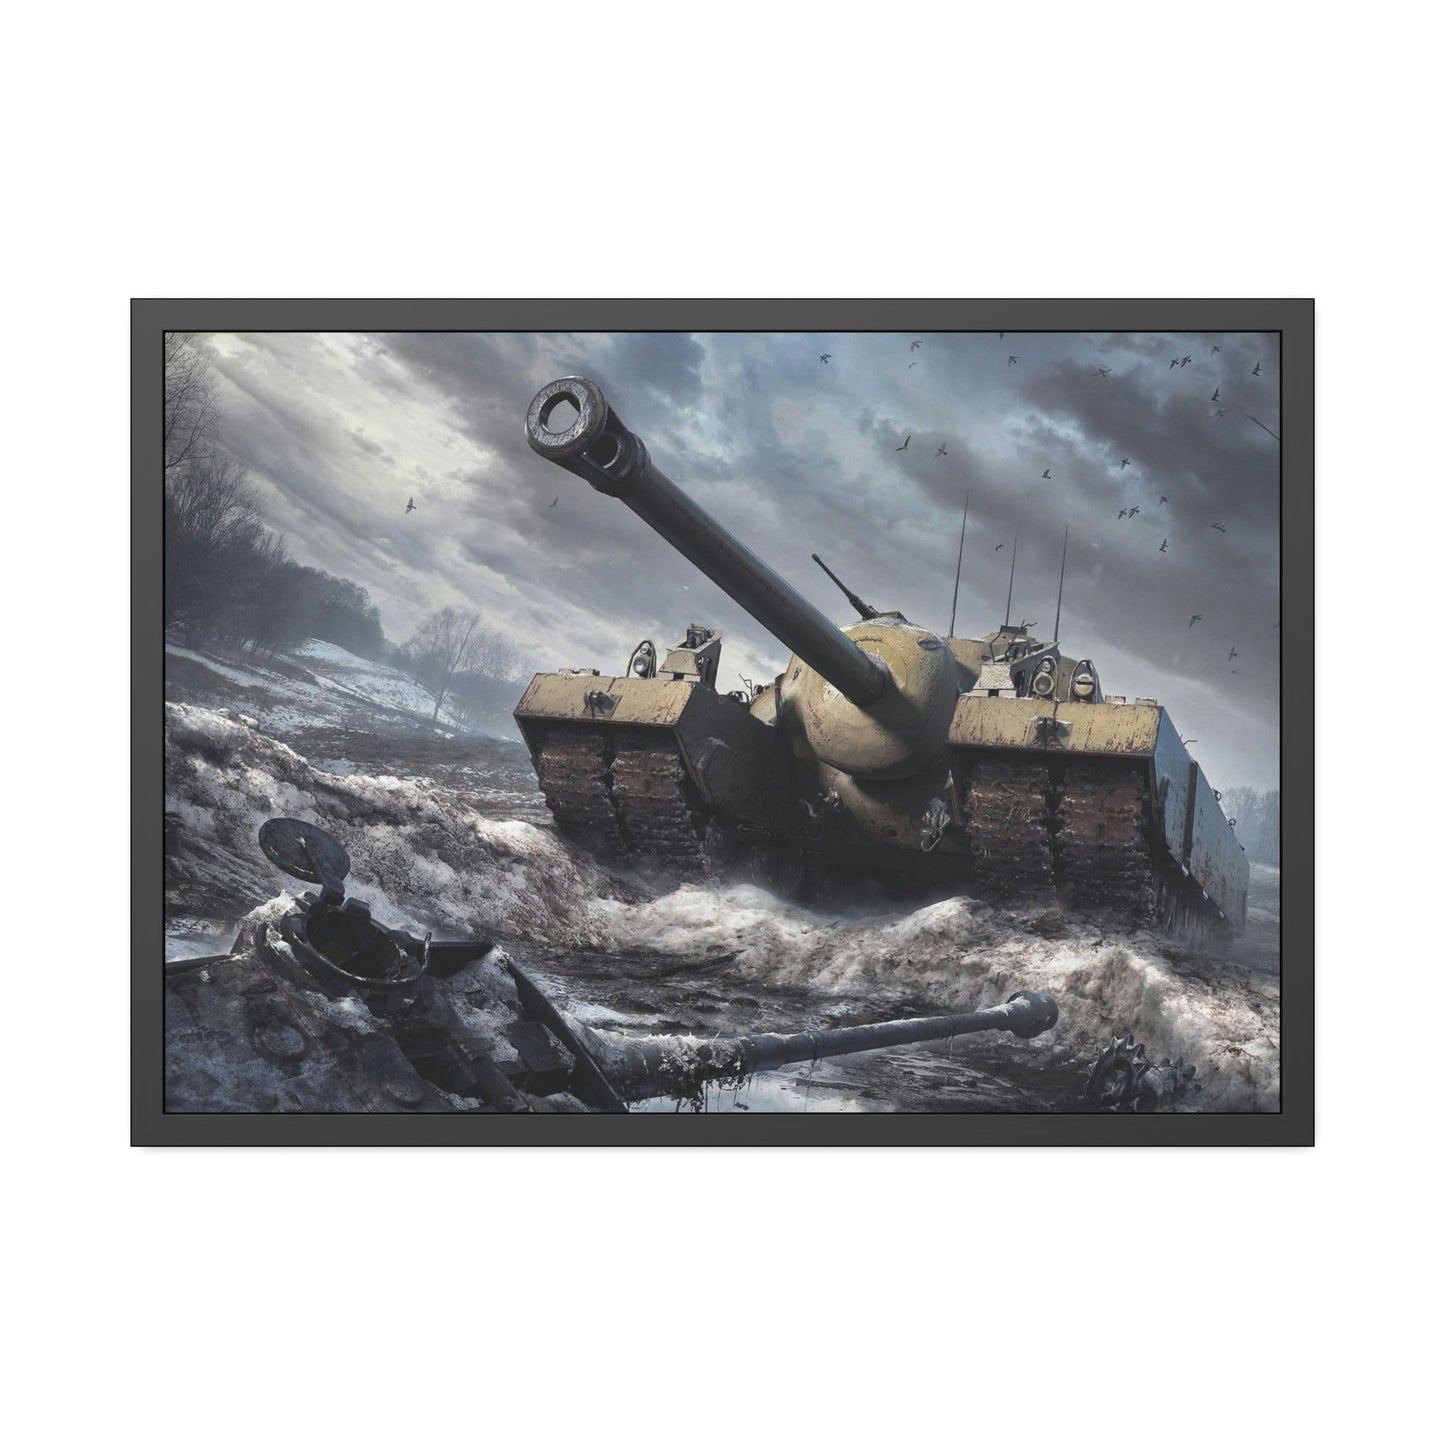 The Art of Armored Warfare: Canvas & Poster Masterpiece from World of Tanks